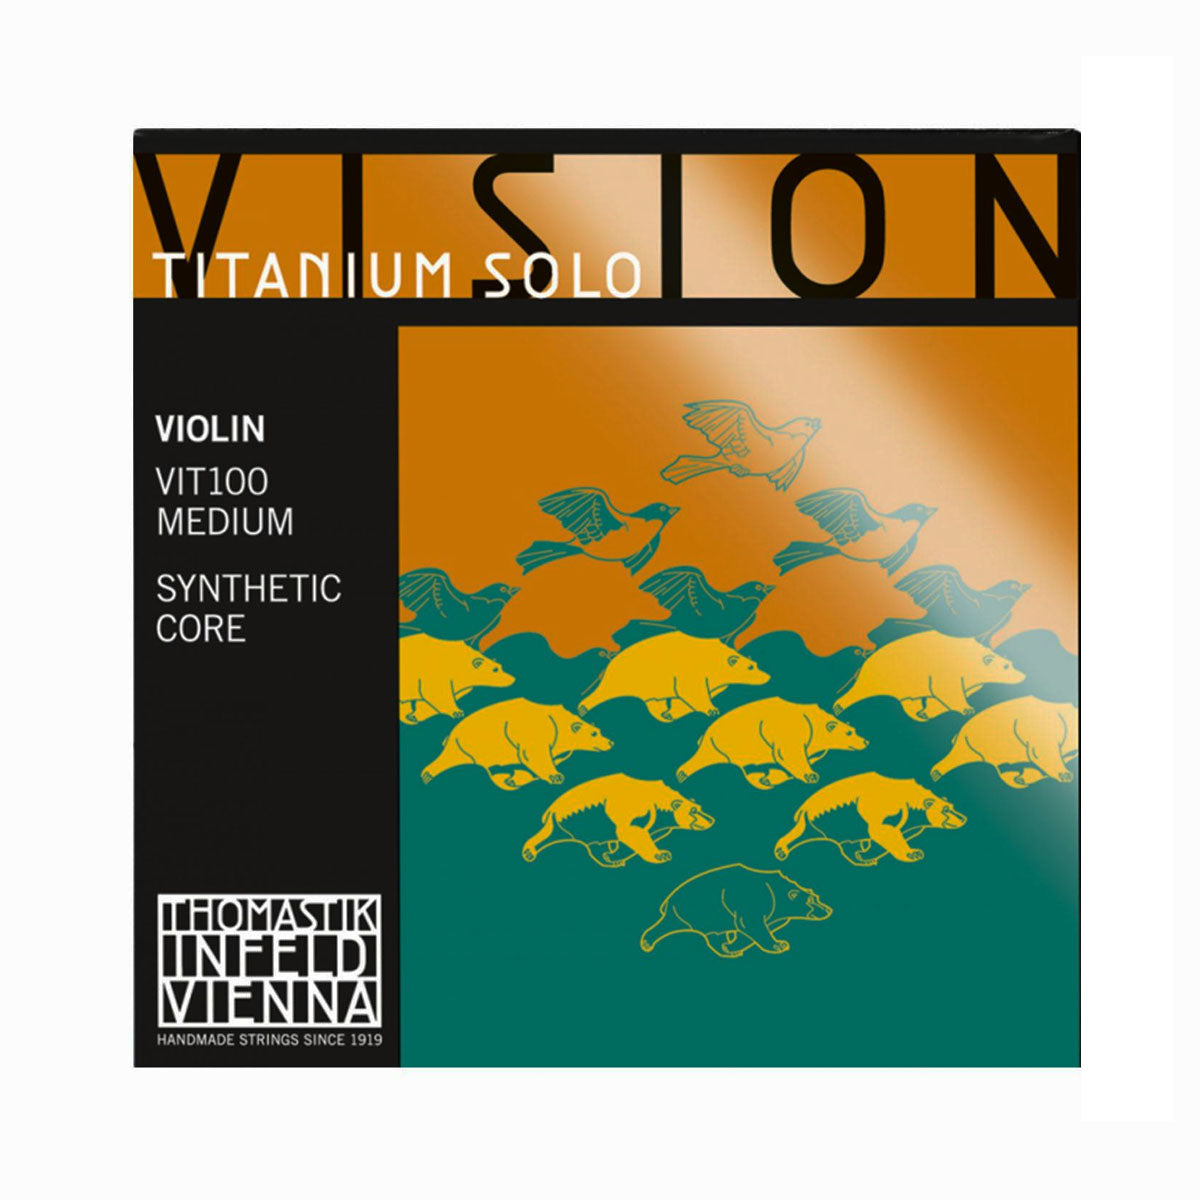 Vision Titanium SOLO Violin Strings, Thomastik Infeld, Austria, full size, 4/4, 3/4, 1/2, 1/4, 1/8, 1/16, hand-picked and inspected by Violins and such, with TEO musical Instruments, London Ontario Canada